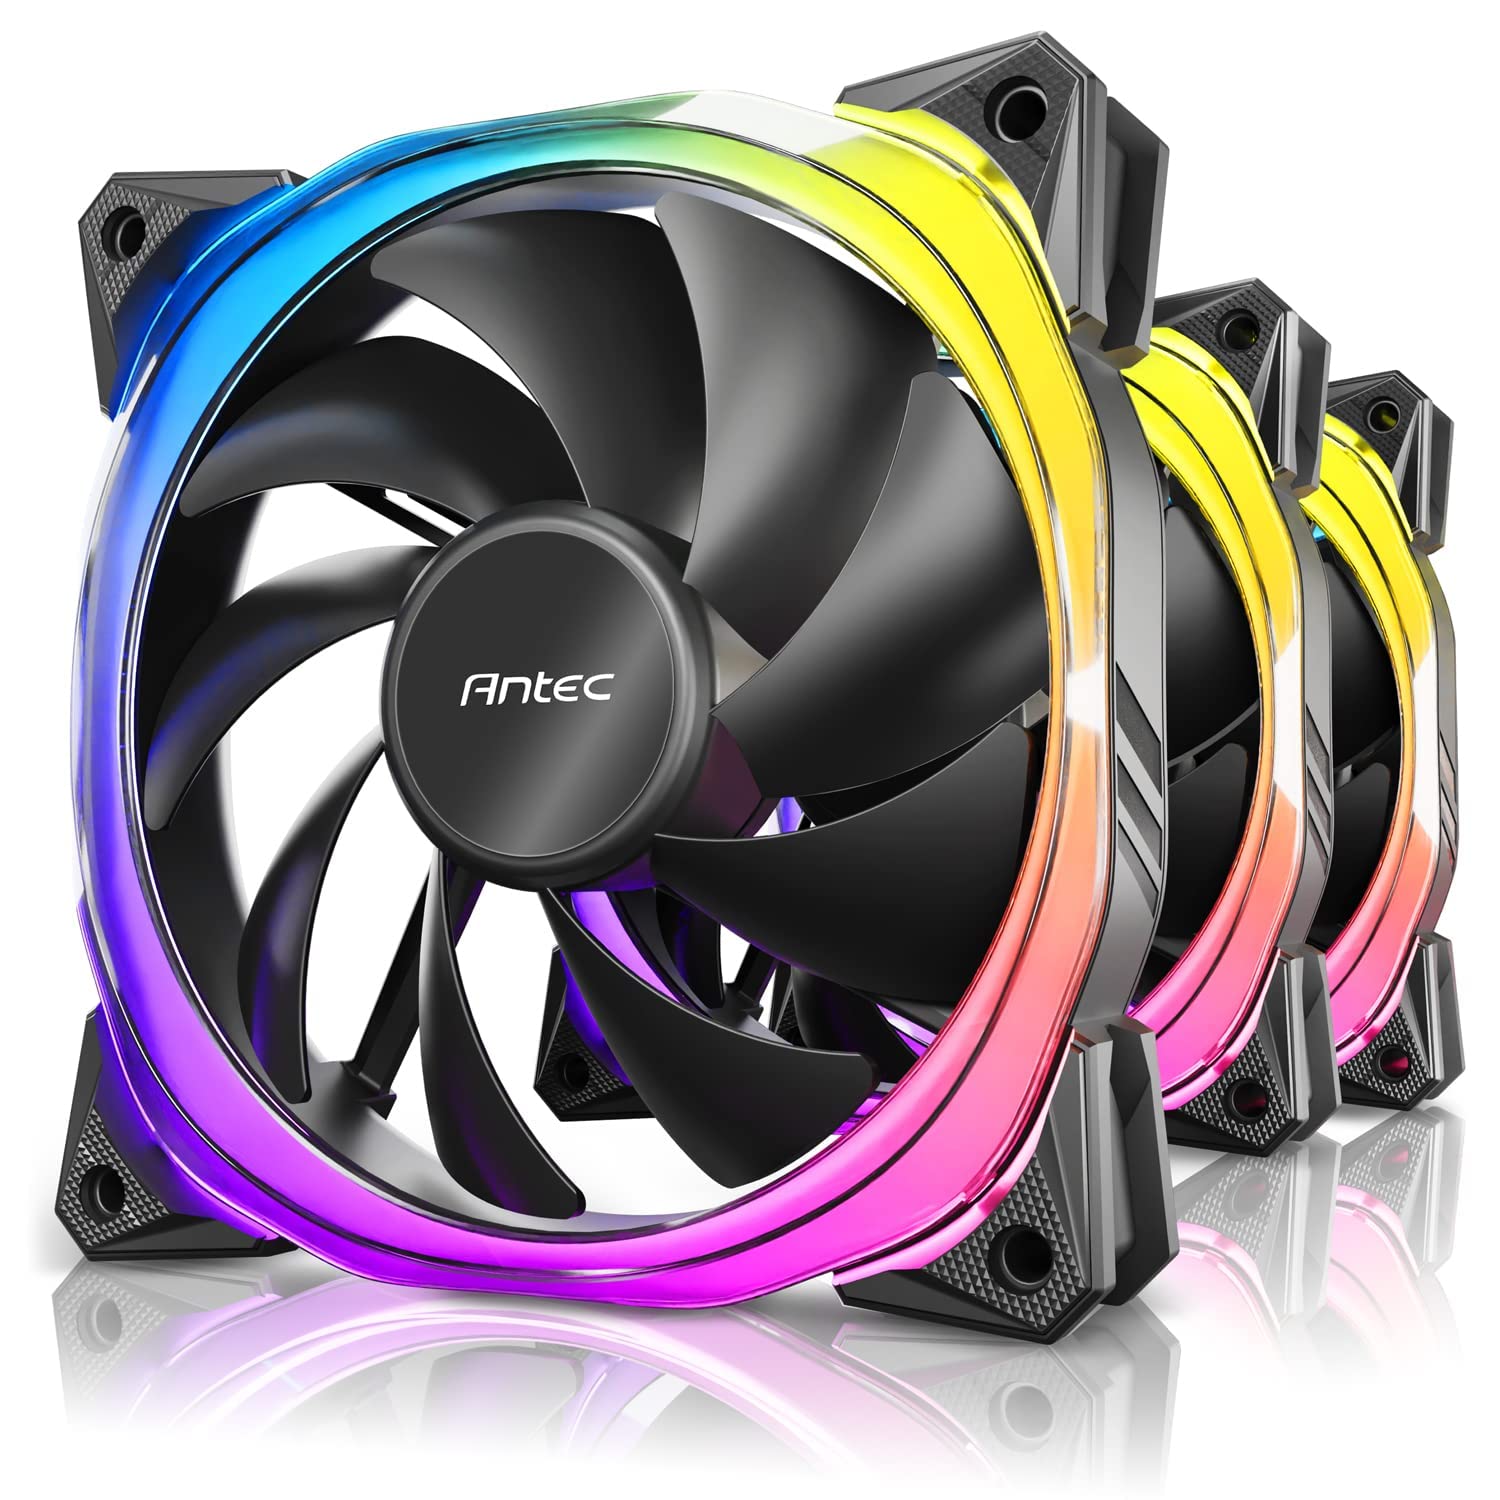 Antec RGB Fans PC Fans 5V-3PIN Addressable RGB Fans 120mm Fan with Controller Motherboard SYNC with 5V-3PIN Fusion Serie